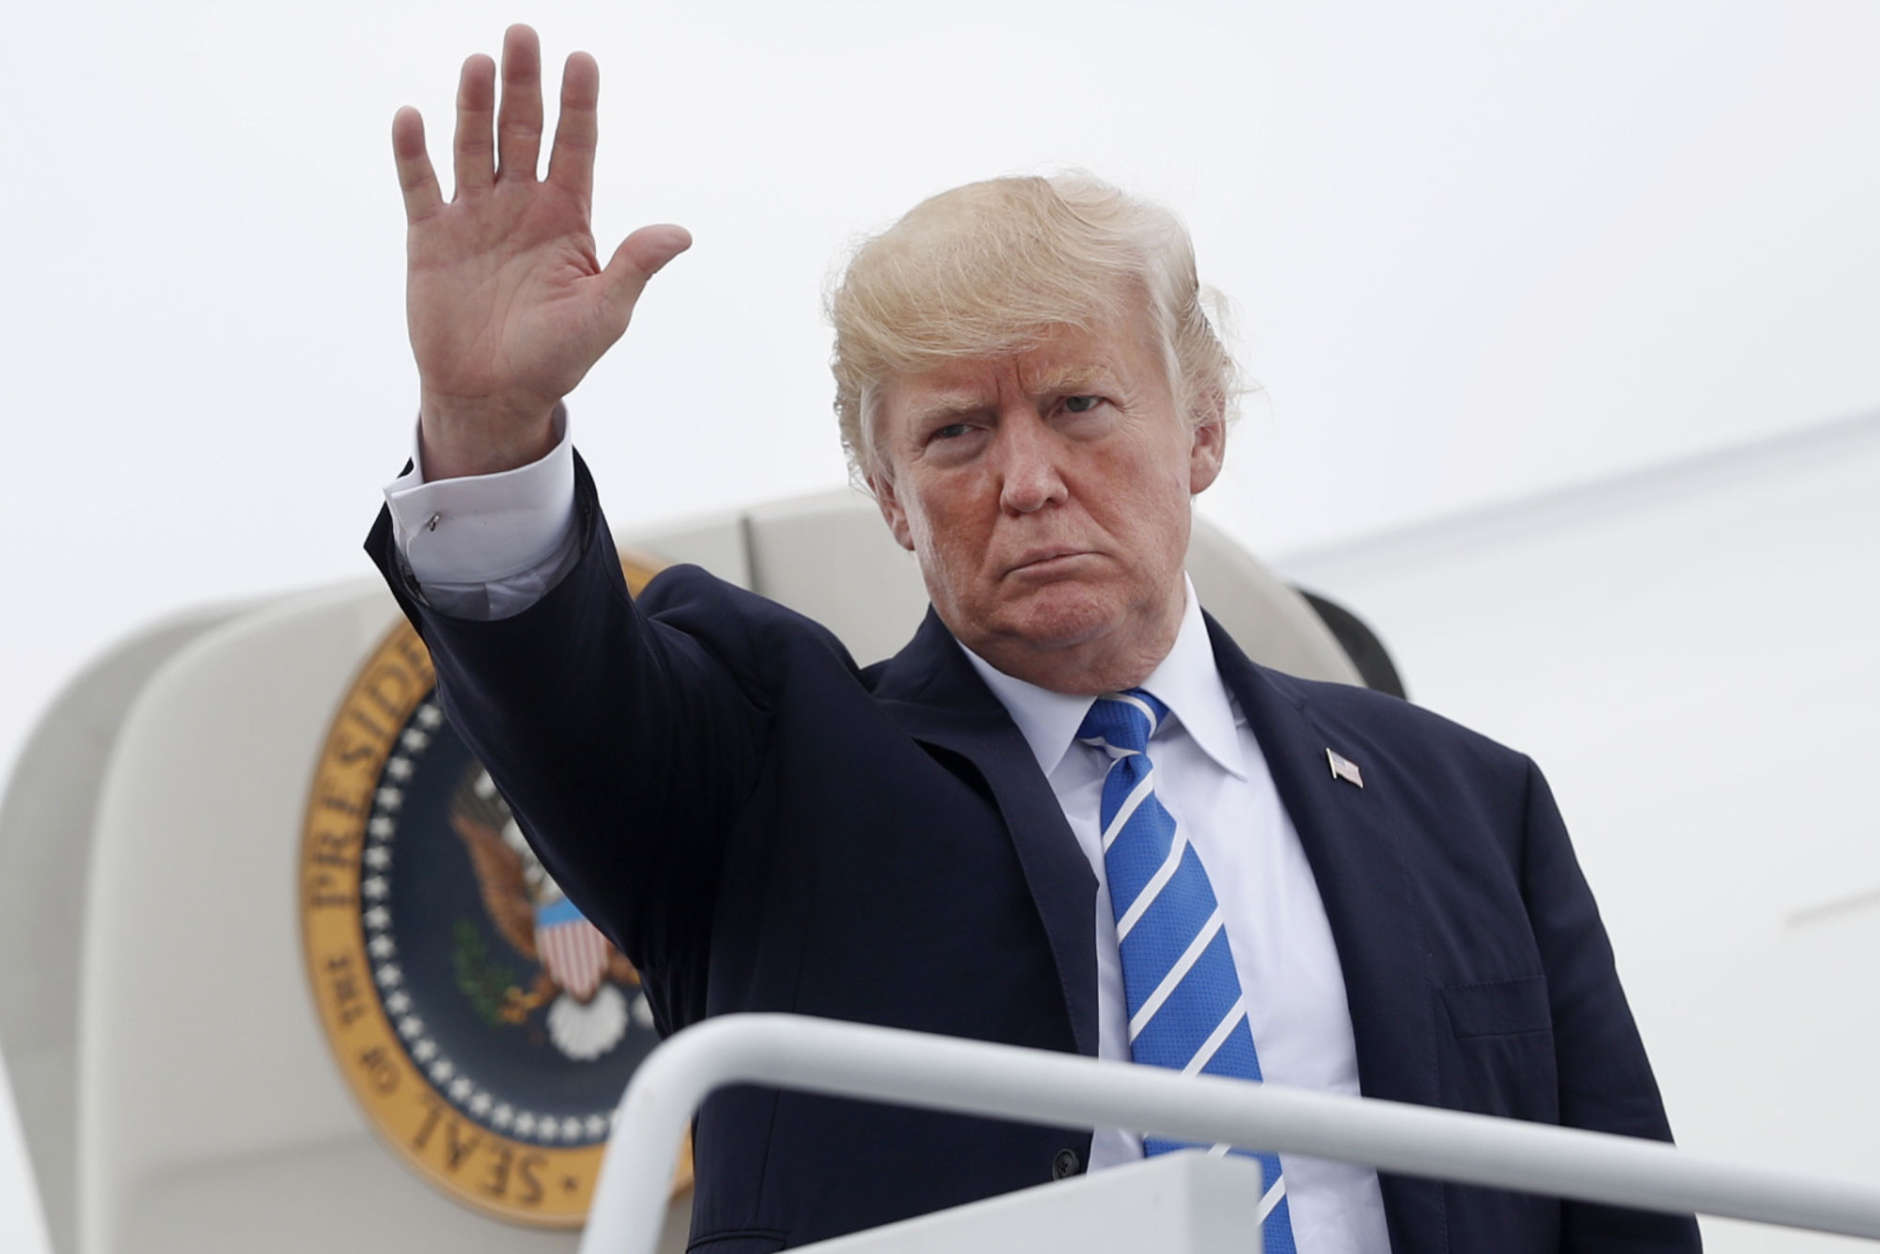 President Donald Trump waves as he boards Air Force One at Hagerstown Regional Airport in Hagerstown, Md., Friday, Aug. 18, 2017, following a national security meeting at Camp David. (AP Photo/Pablo Martinez Monsivais)